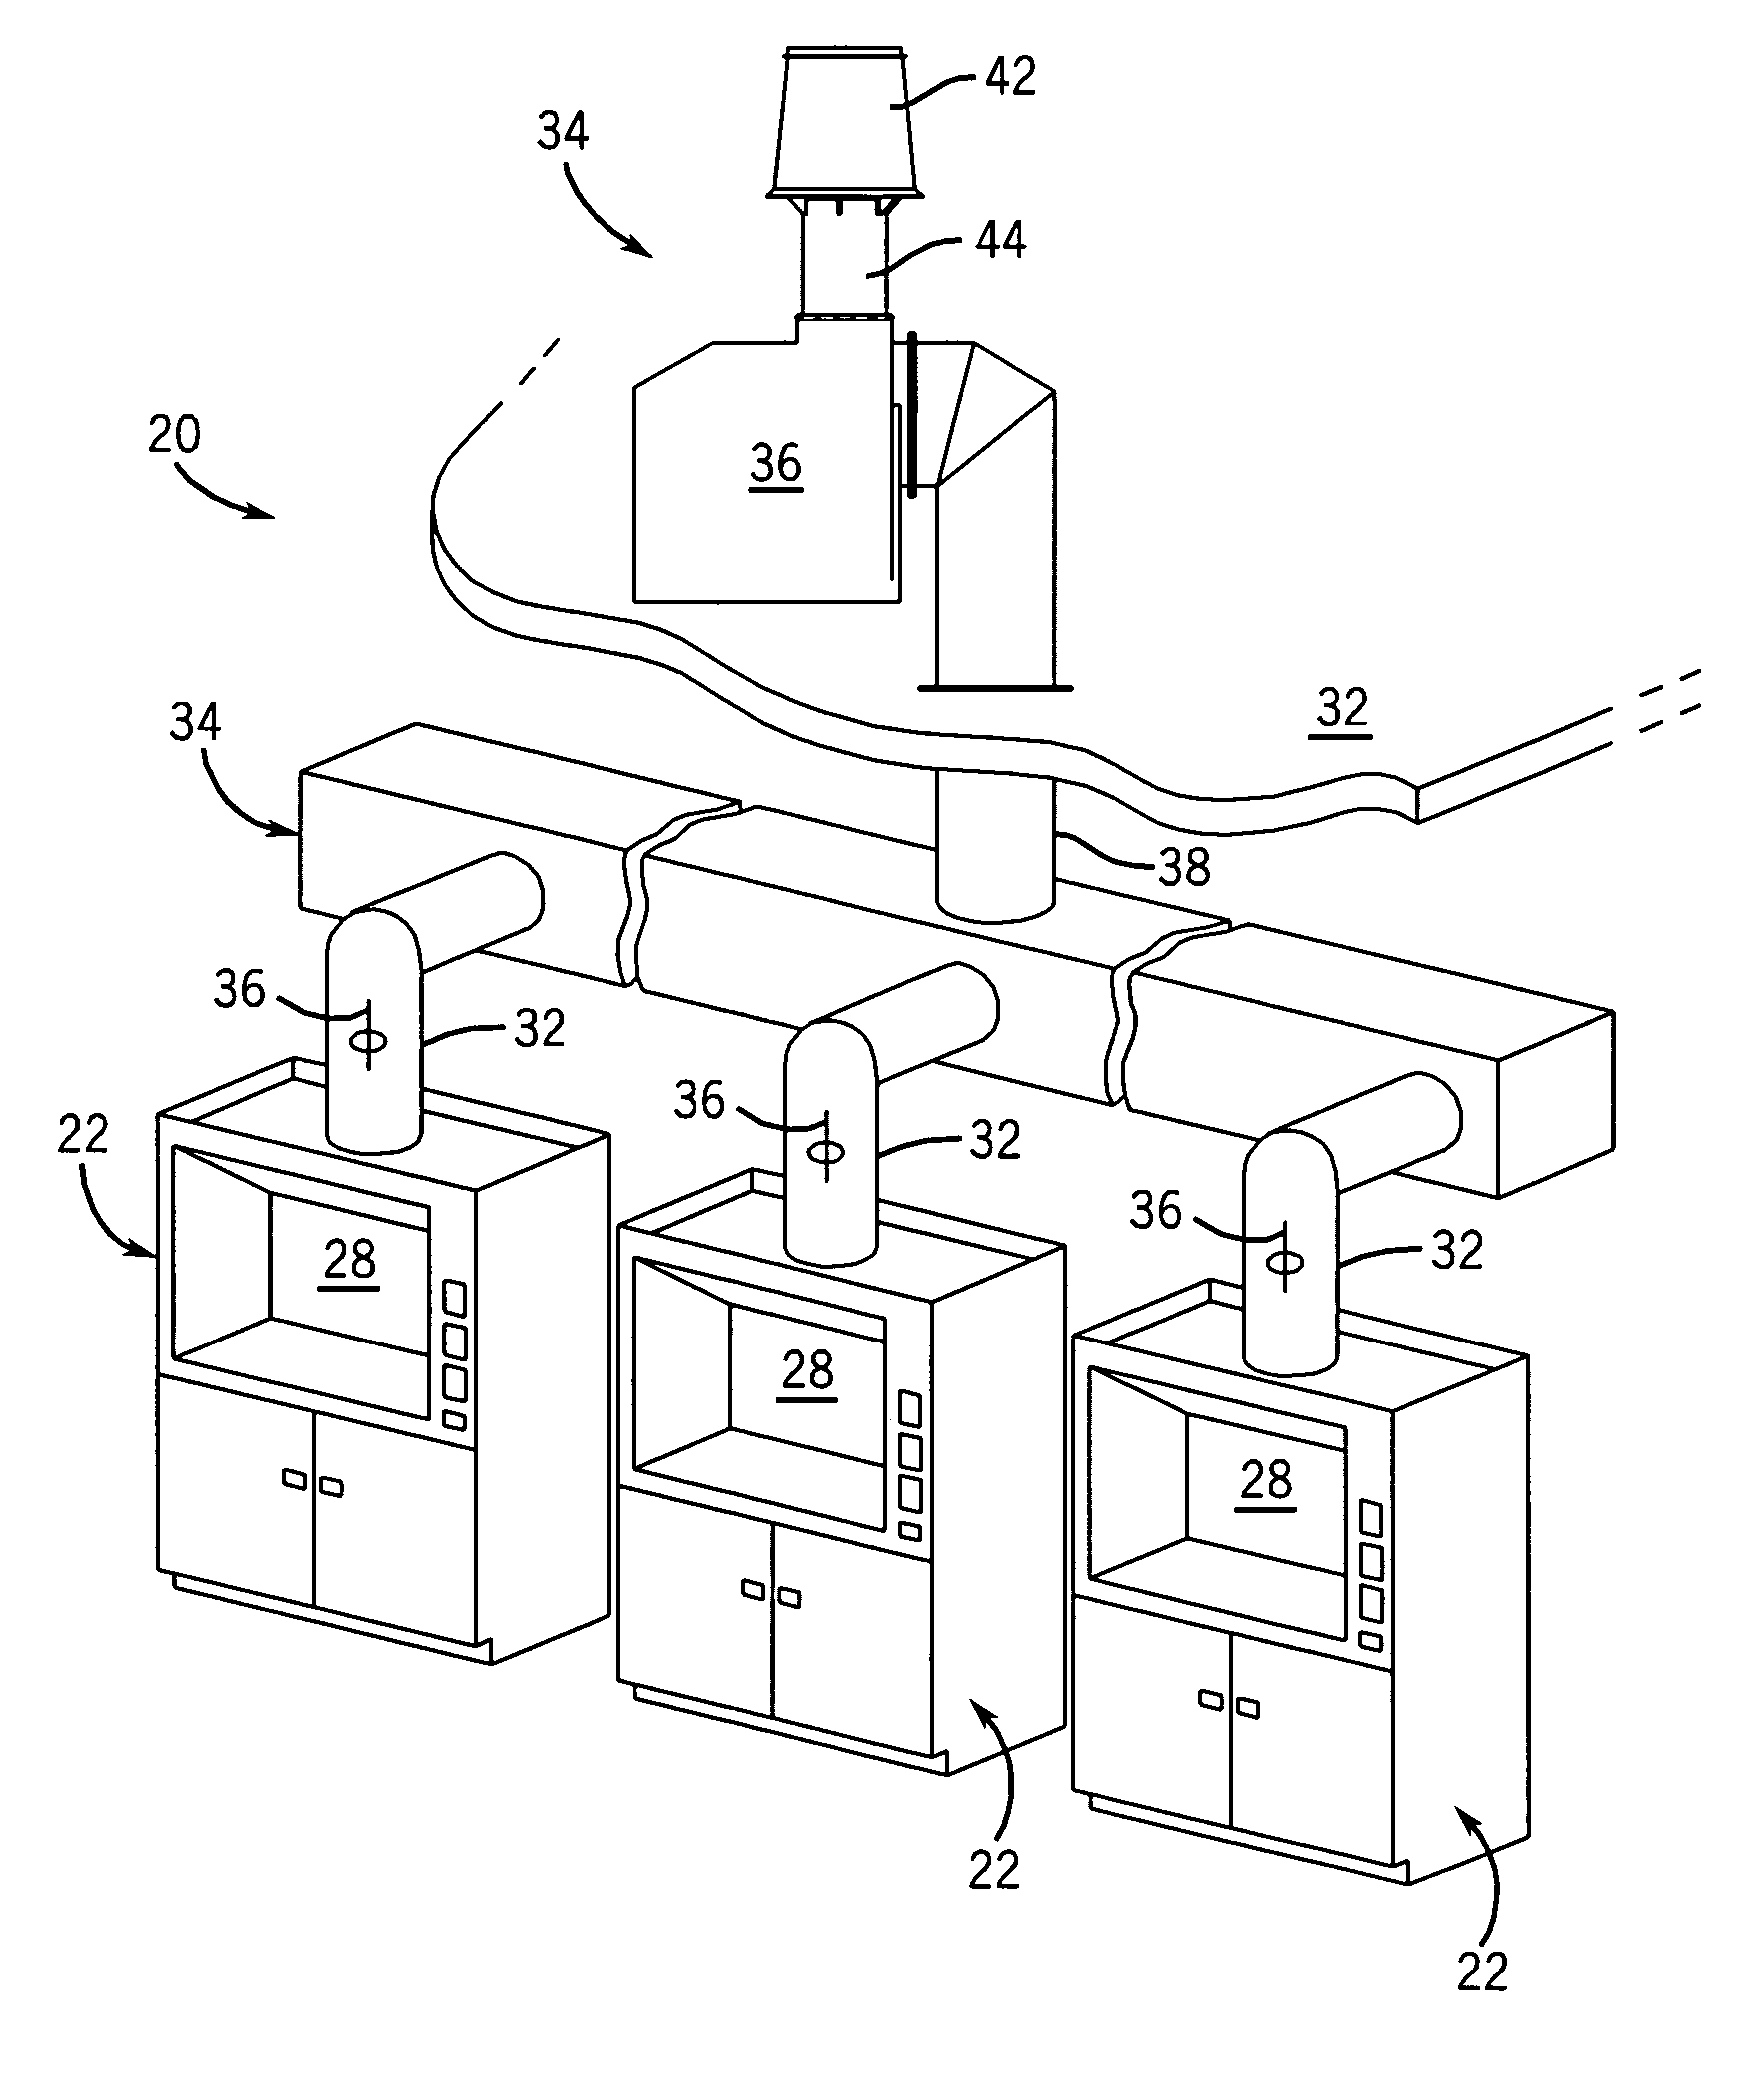 Exhaust fan assembly having H-out nozzle